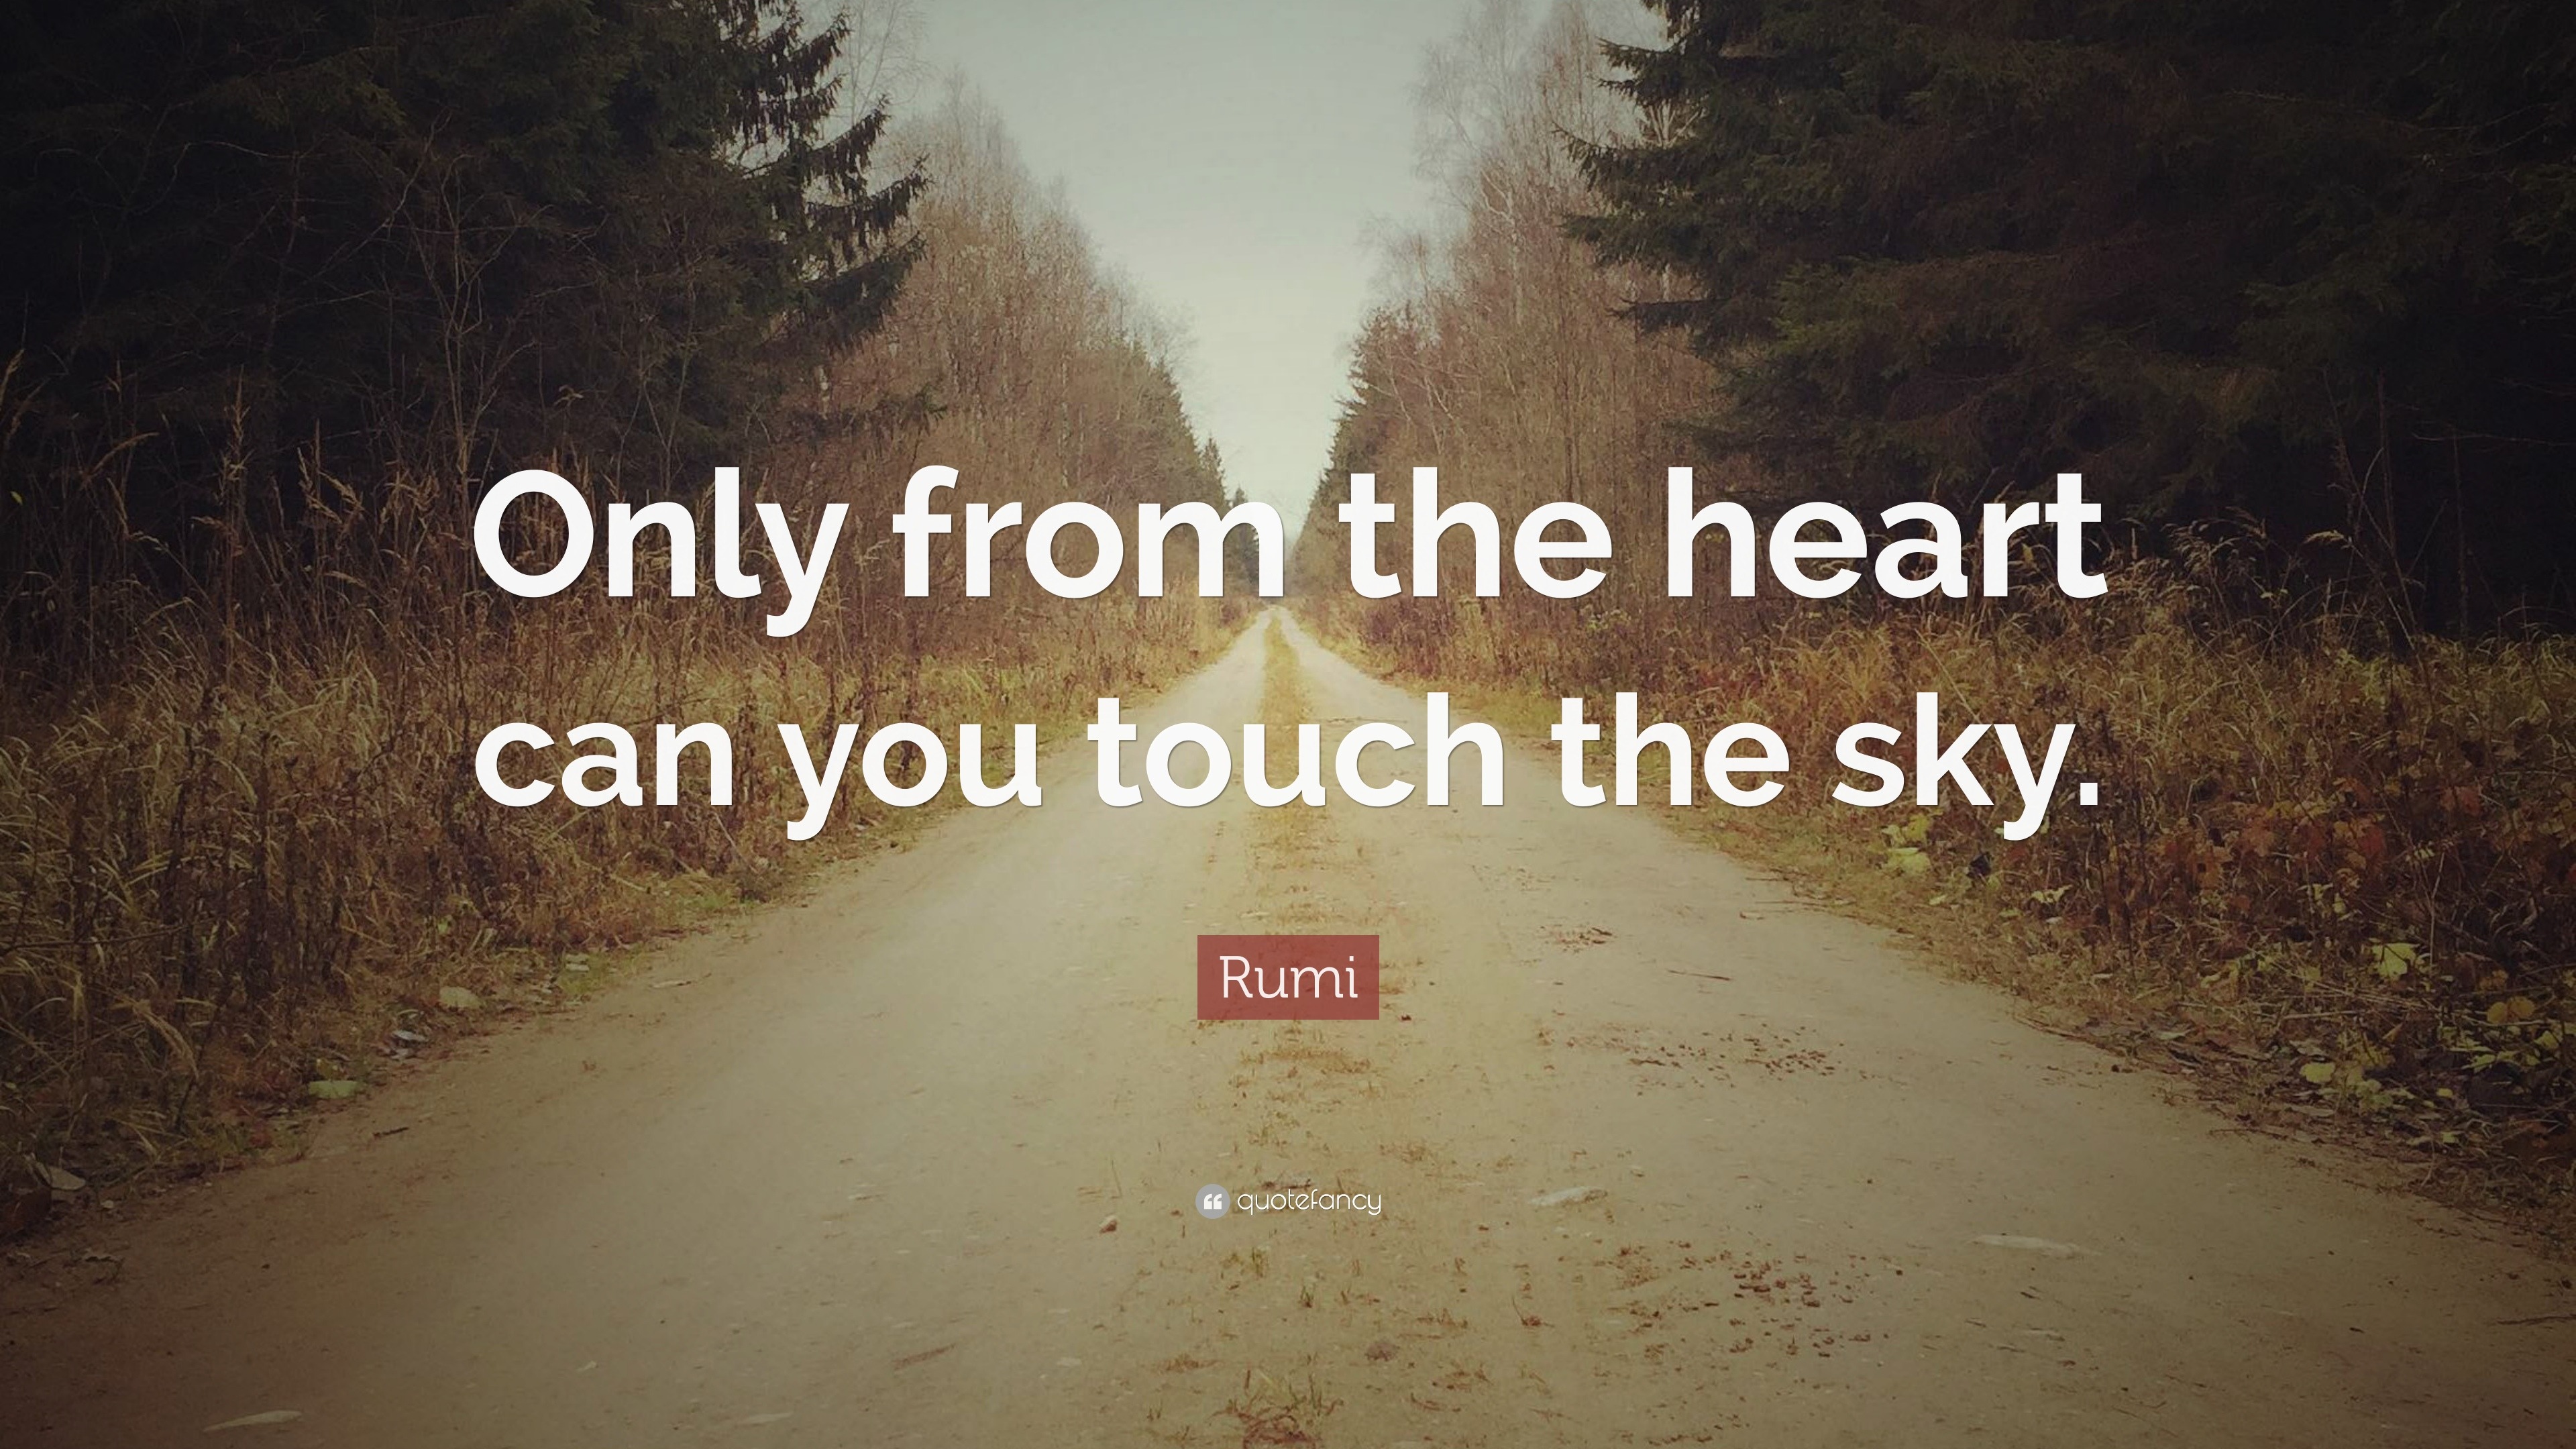 Rumi Quote “Only from the heart can you touch the sky.”